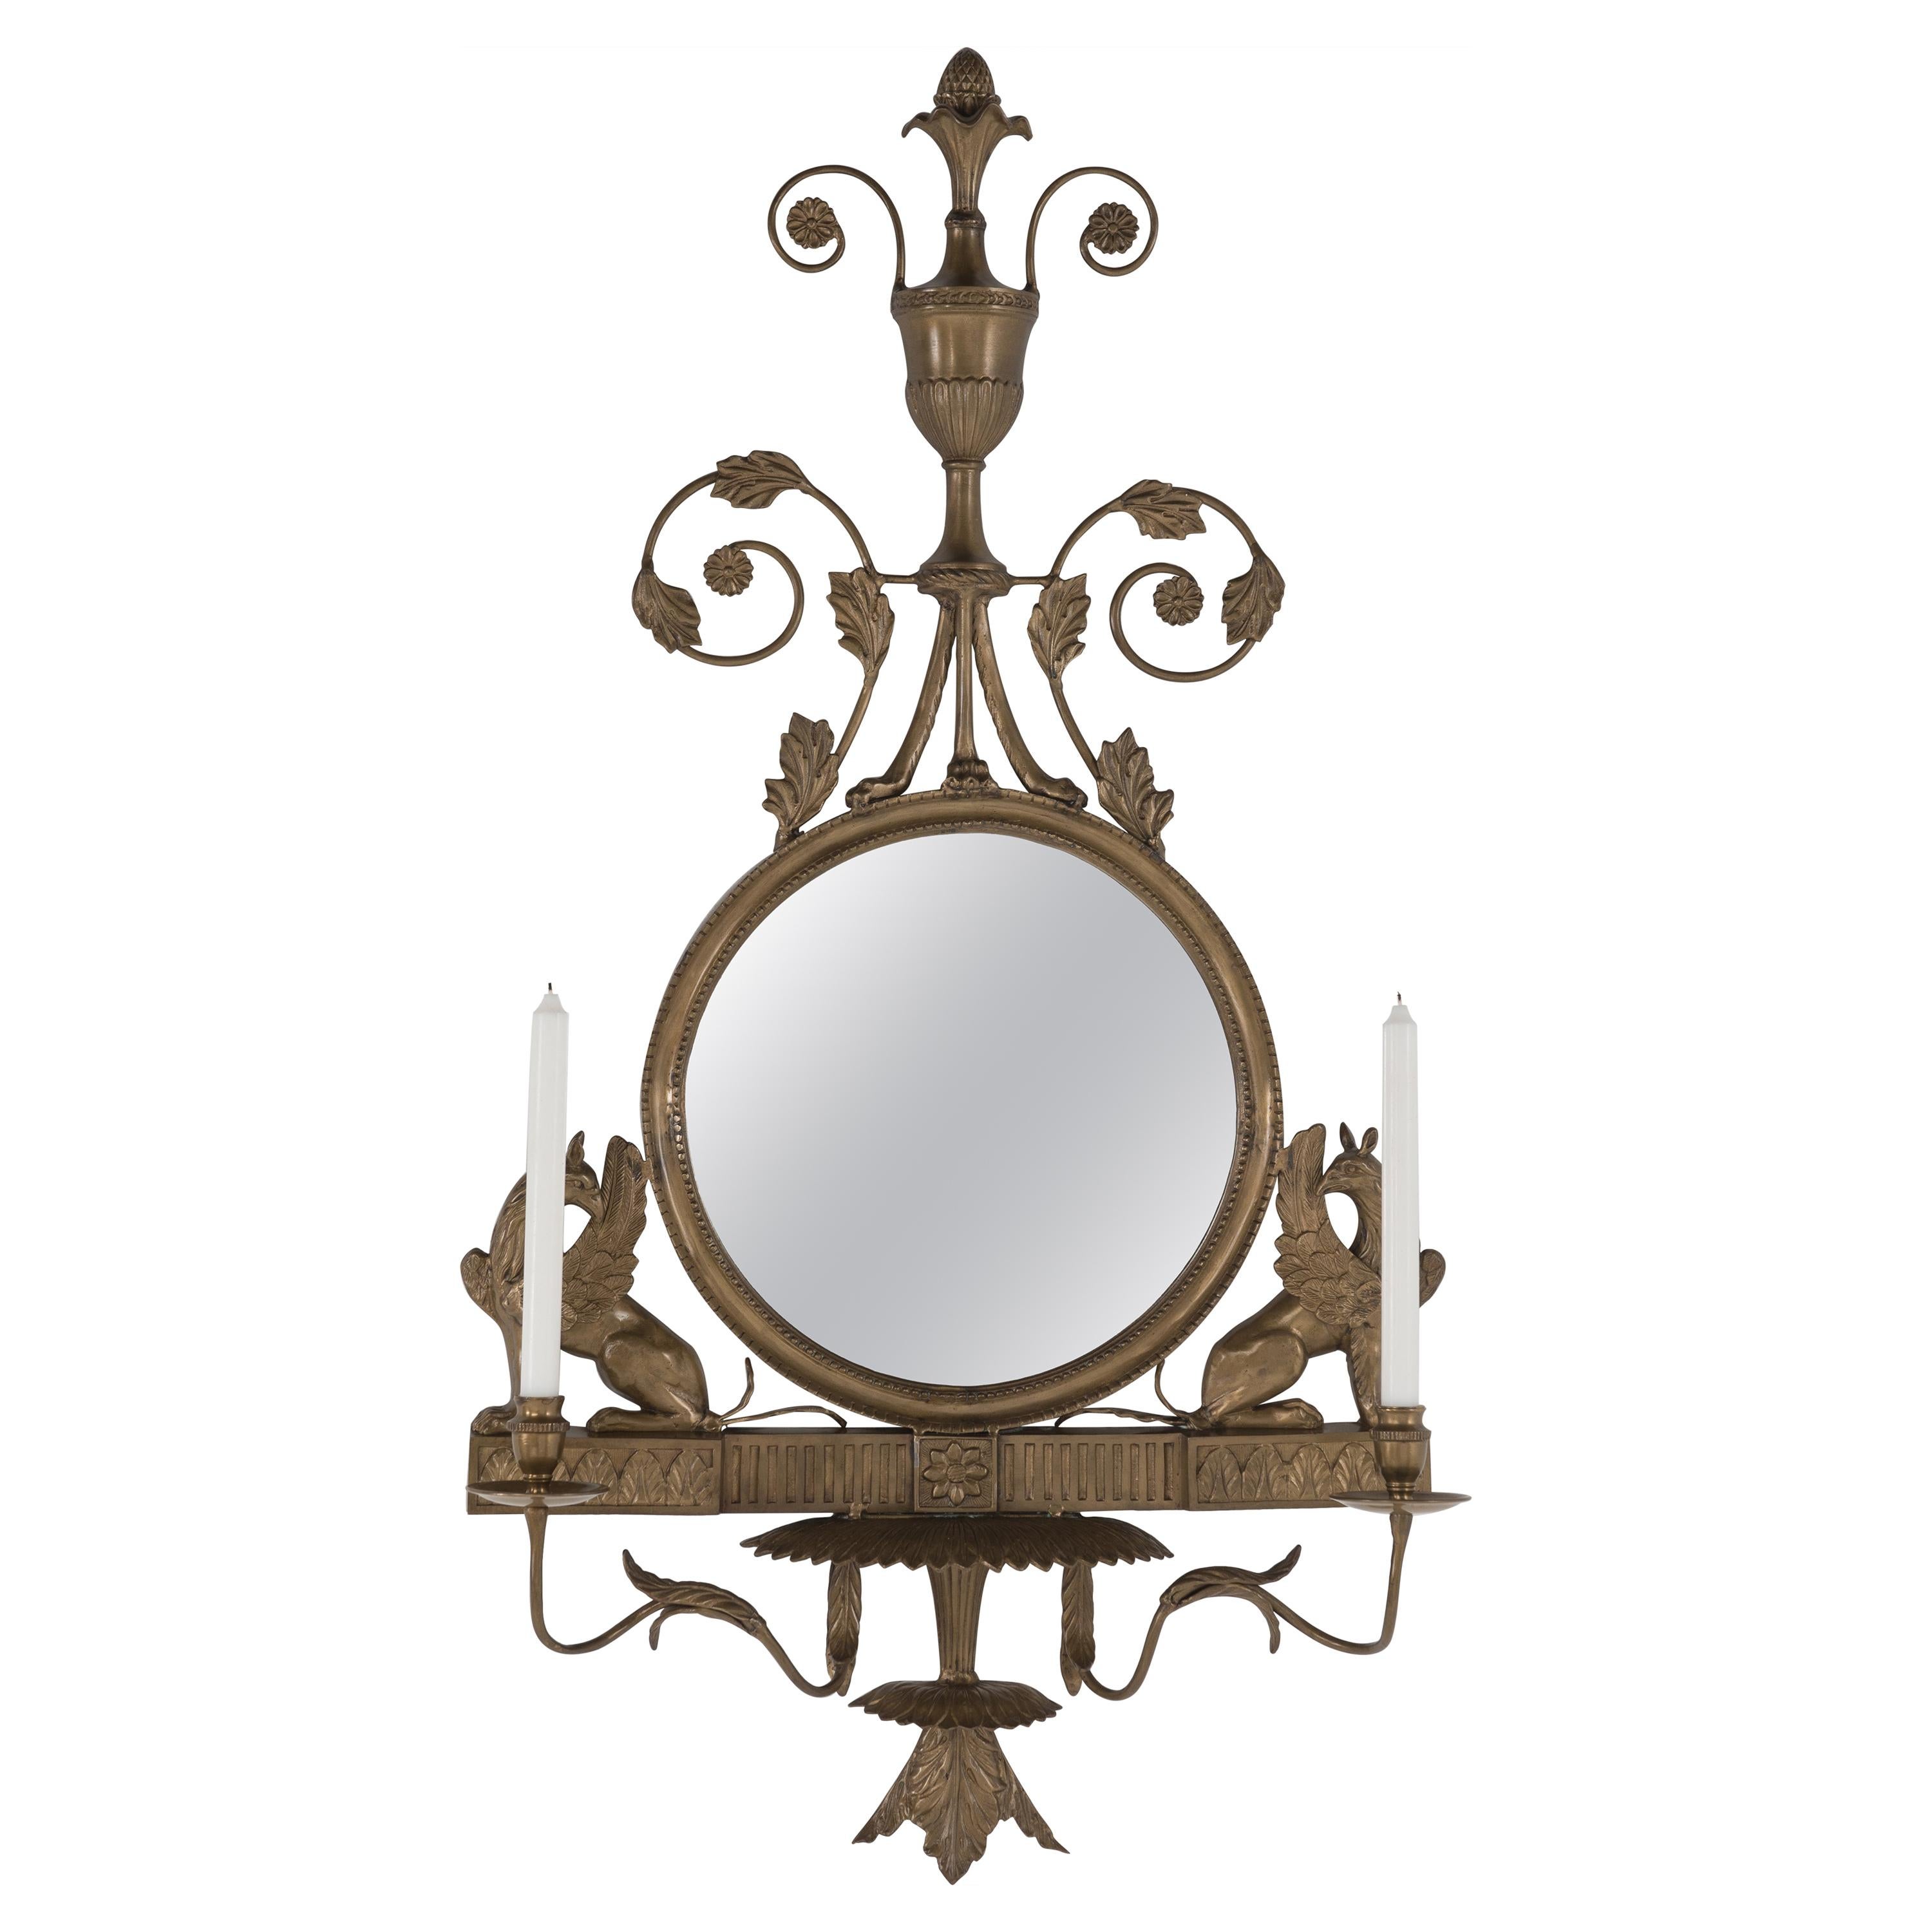 Lovely Regency Style Bronze Mirror with Griffins and Candle Sconces